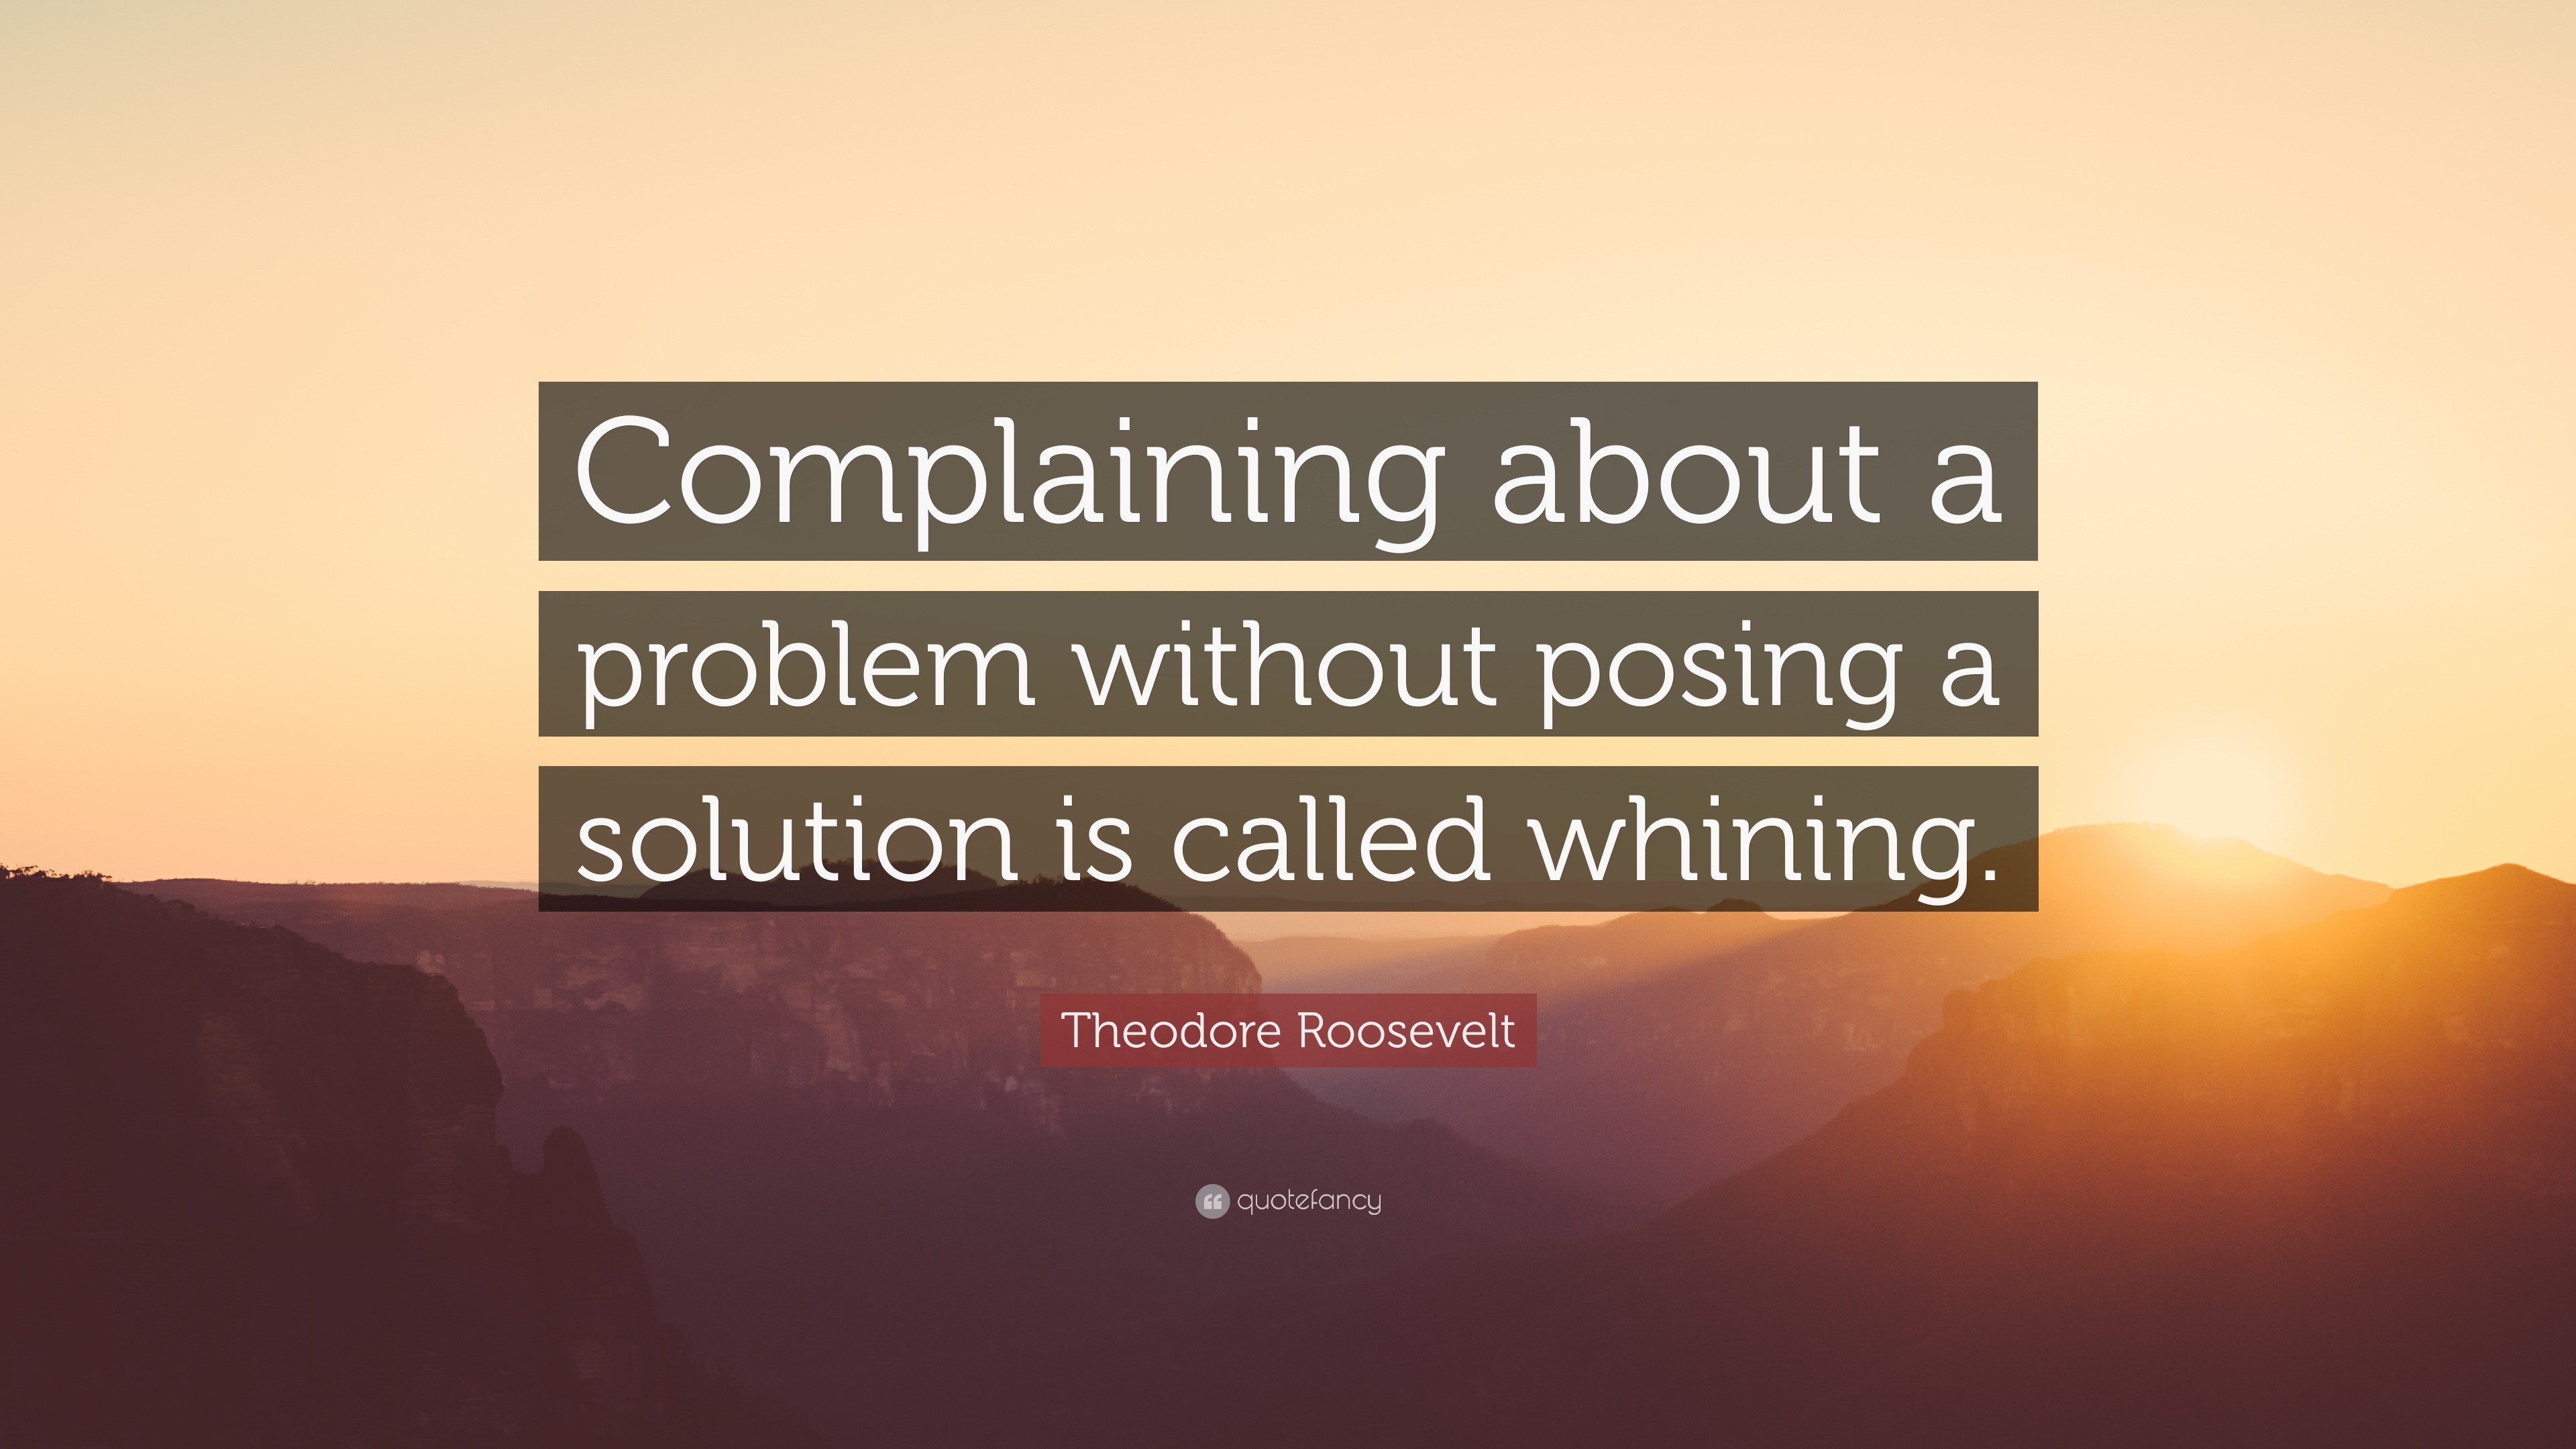 Theodore Roosevelt Quote: “Complaining about a problem without posing a